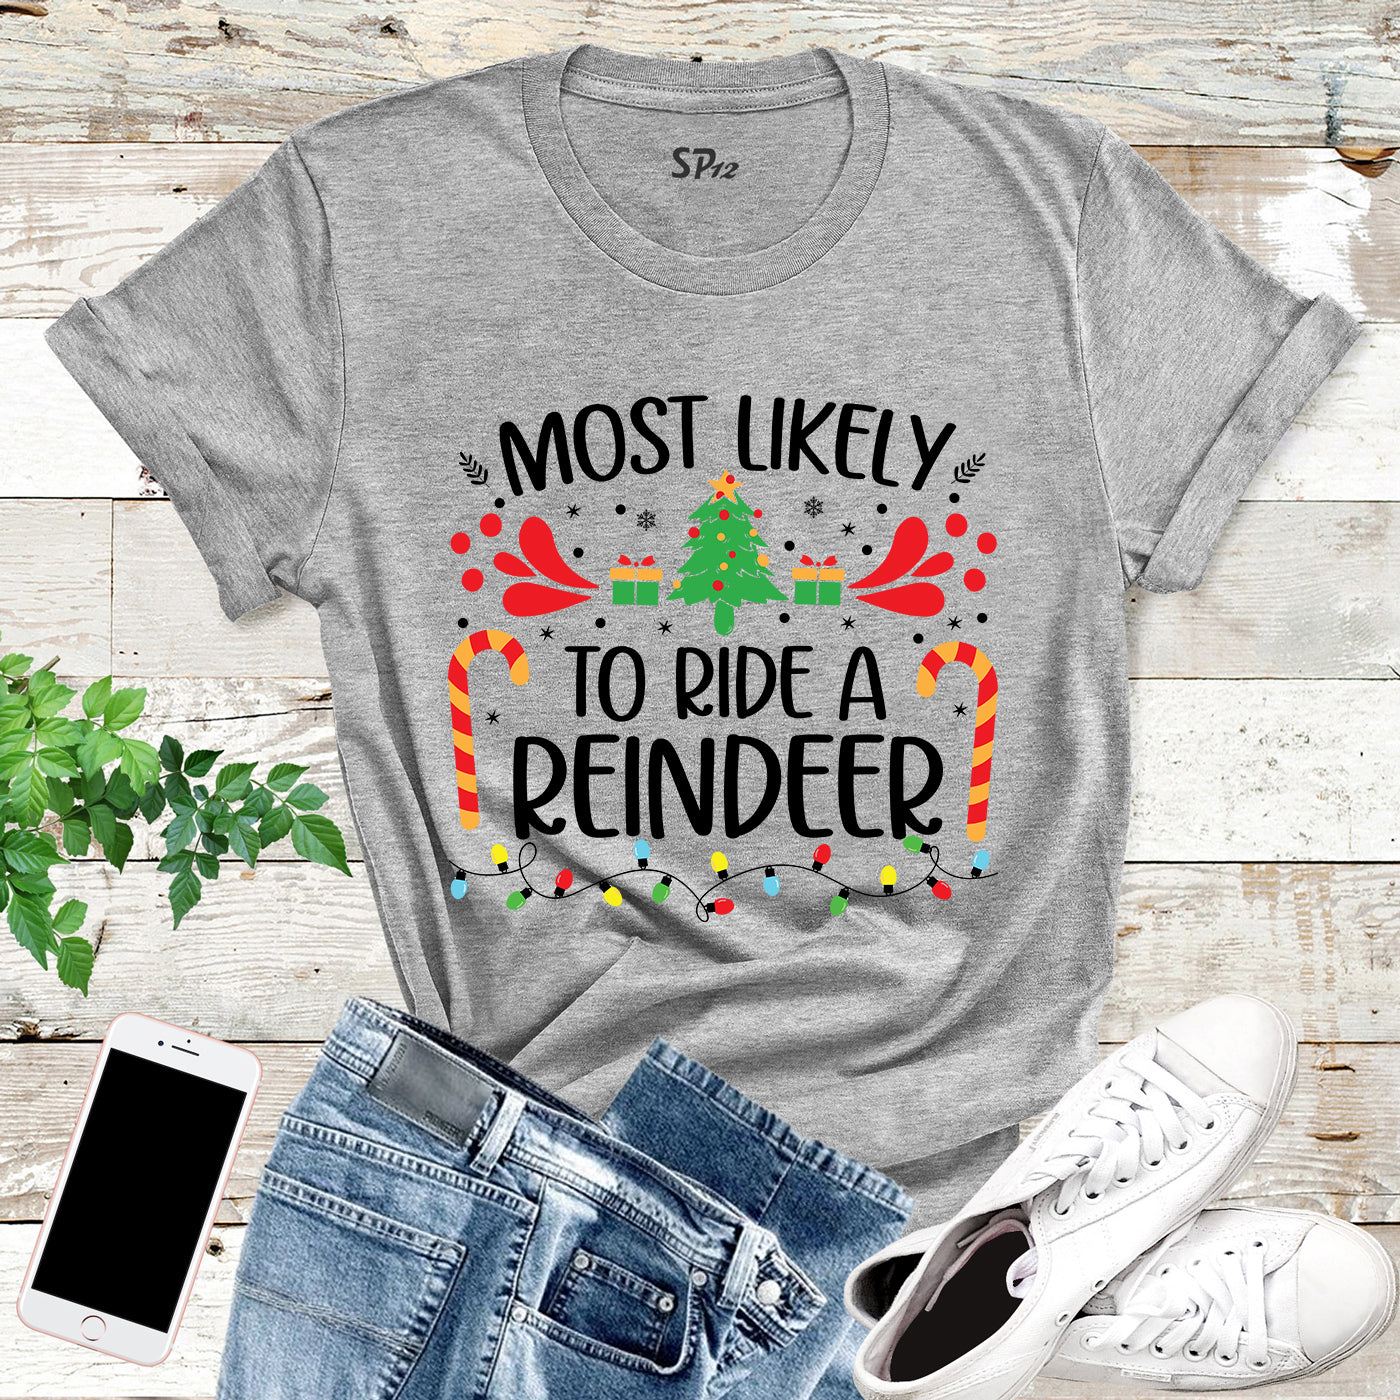 Most Likely to Ride a Reindeer Christmas T Shirt